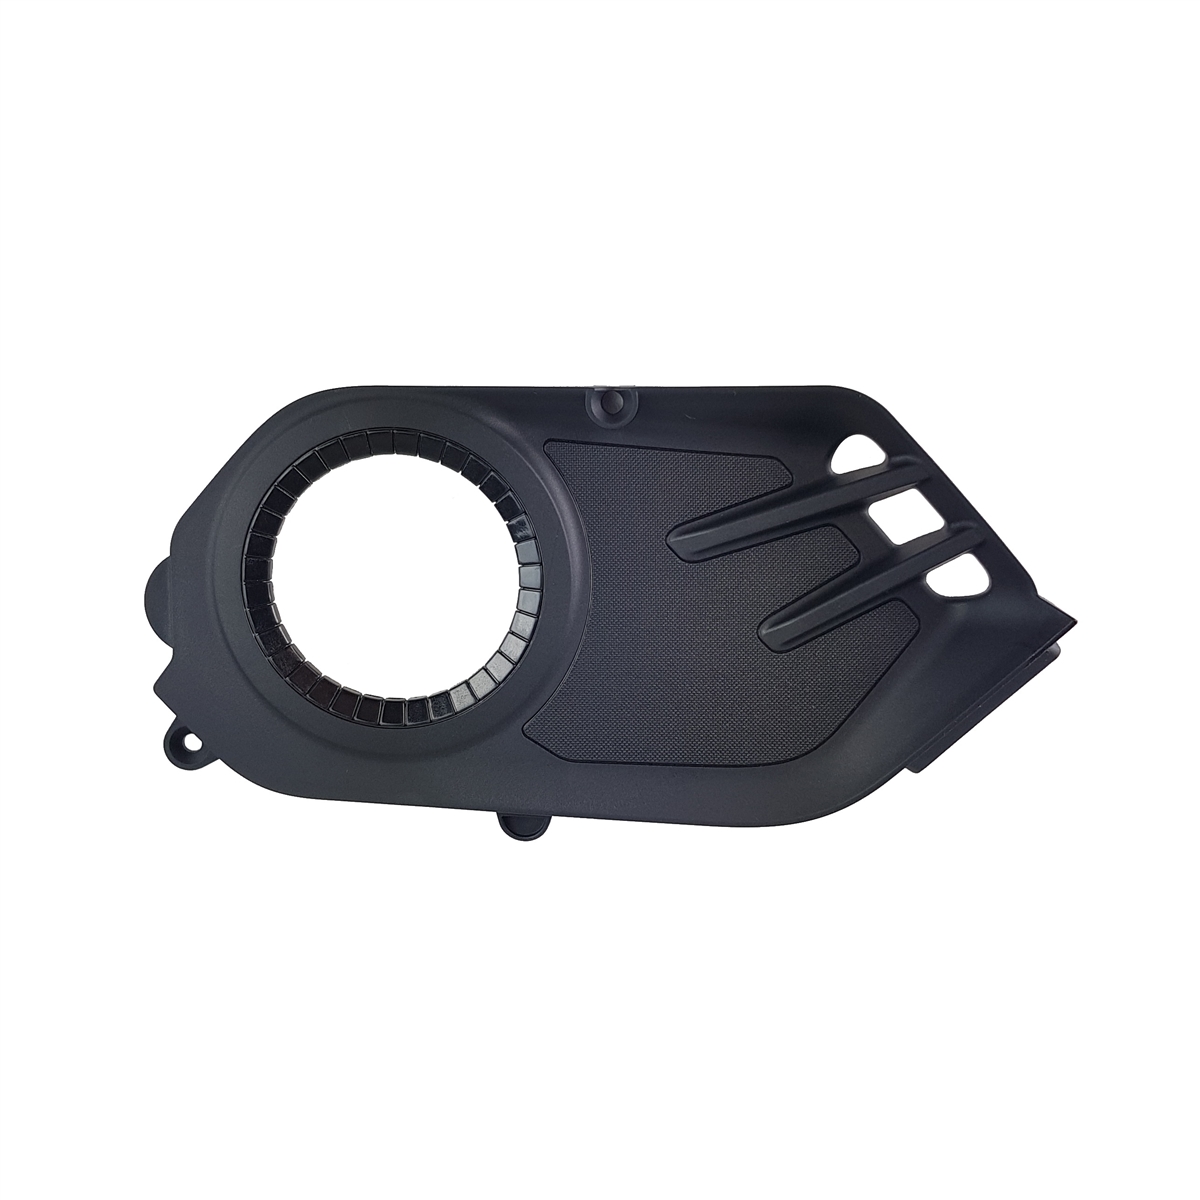 Right engine cover for PW-X2 i600wh AllMtn 6/7/SE models